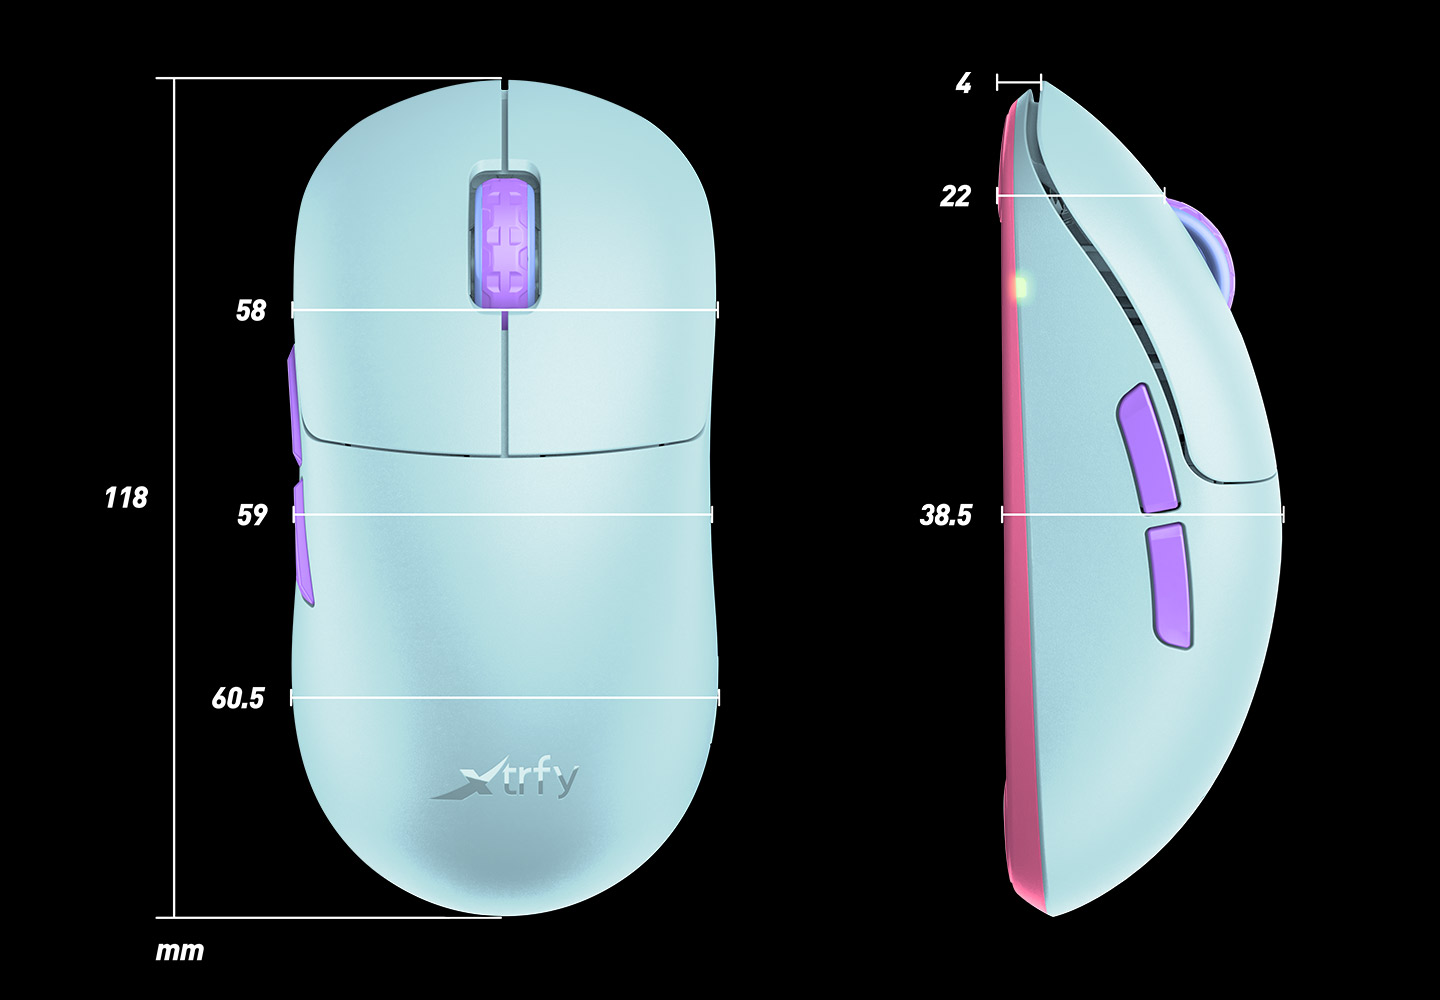 M8-WirelessMint-Gaming-Mouse_size.jpg